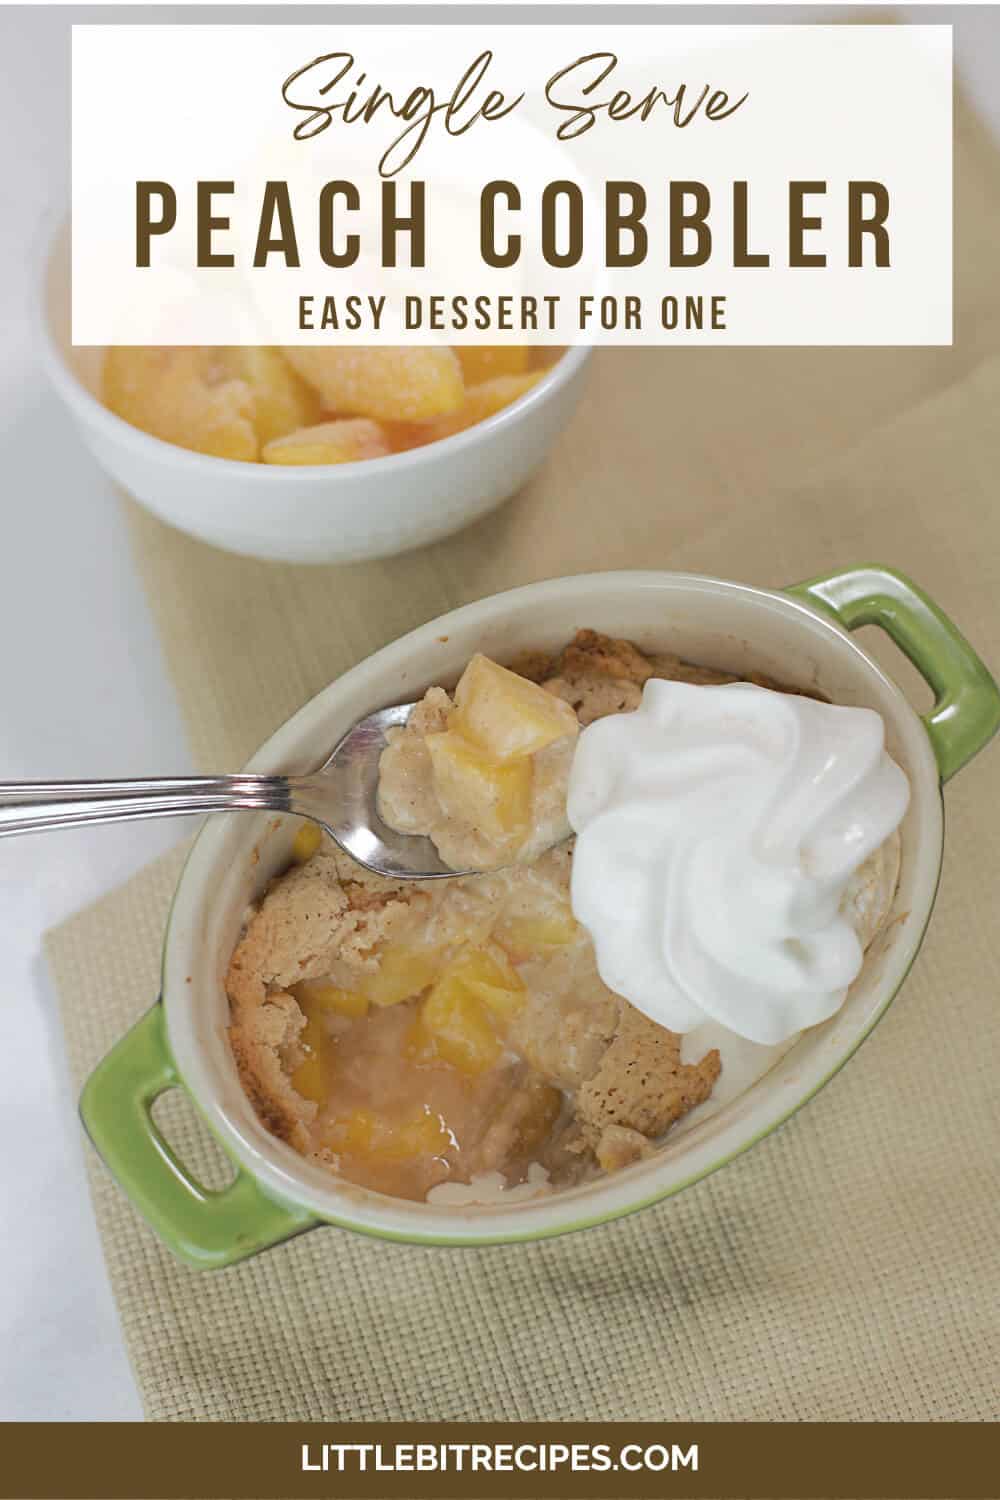 peach cobbler for one with text overlay.